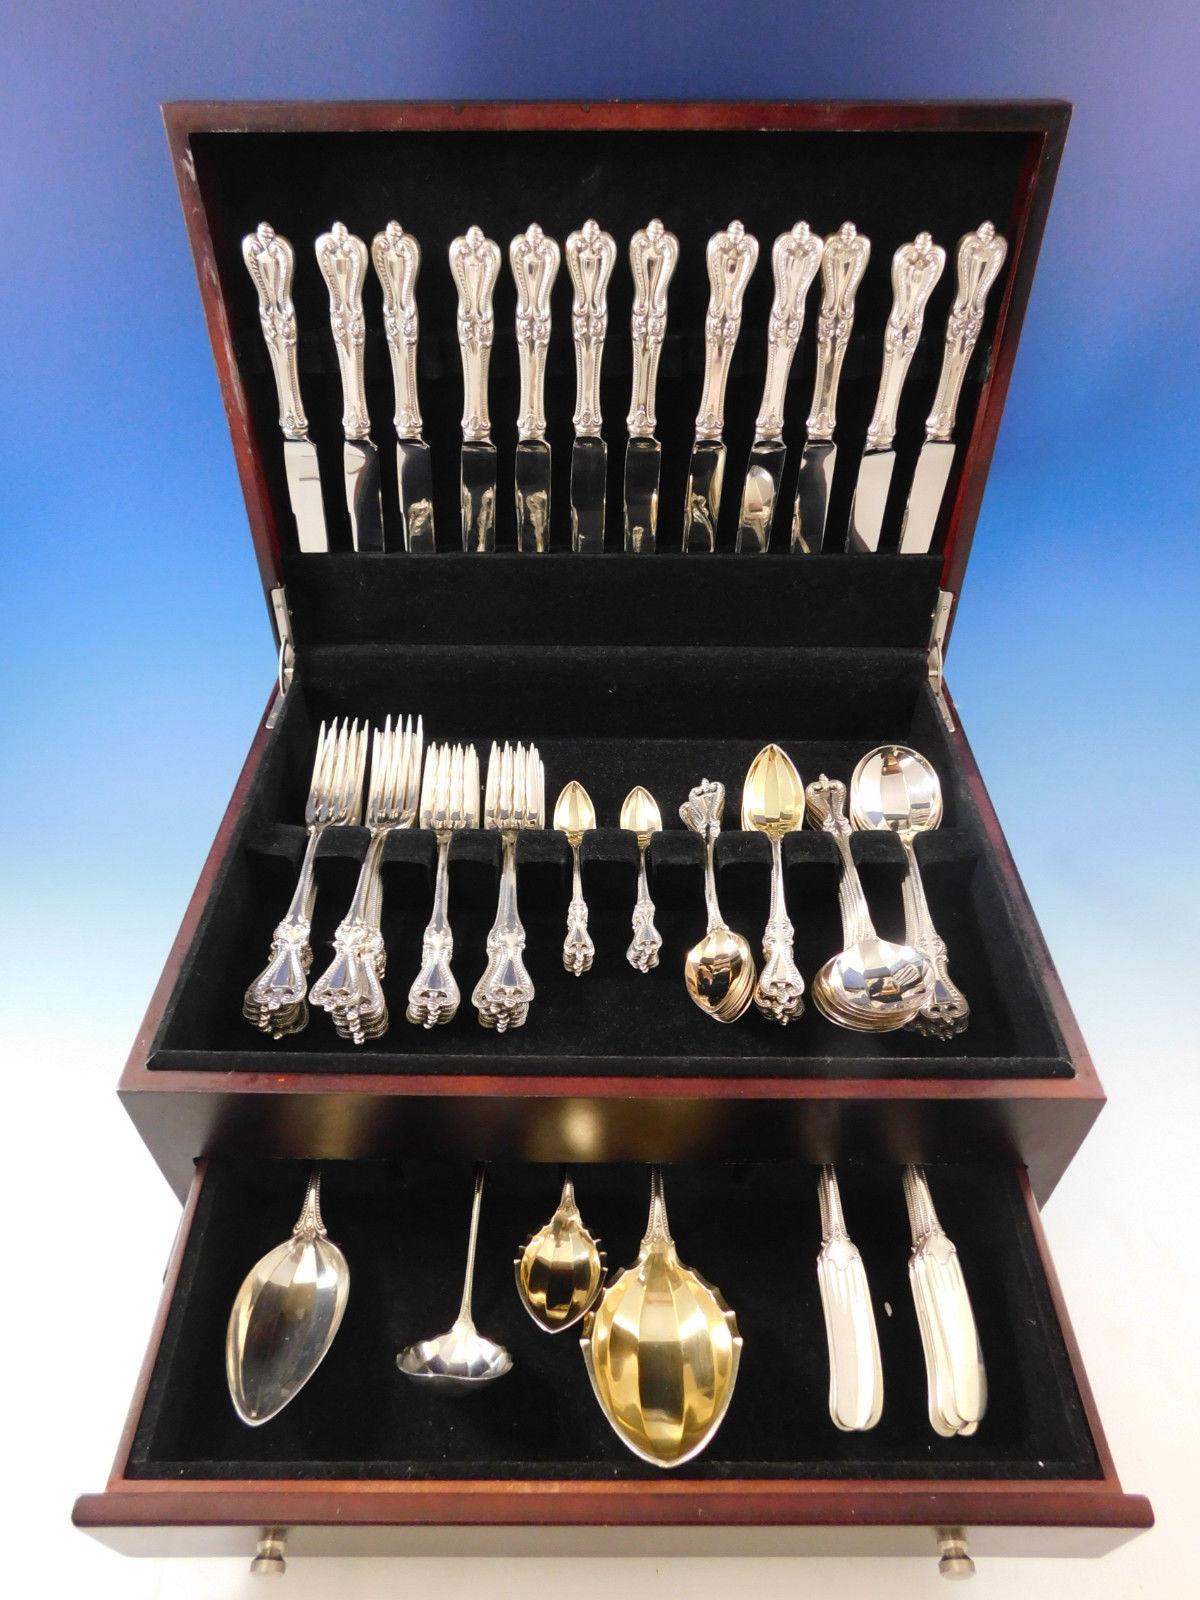 Exquisite Old Colonial by Towle sterling silver flatware set - 88 pieces. This set includes:

12 knives, 8 7/8